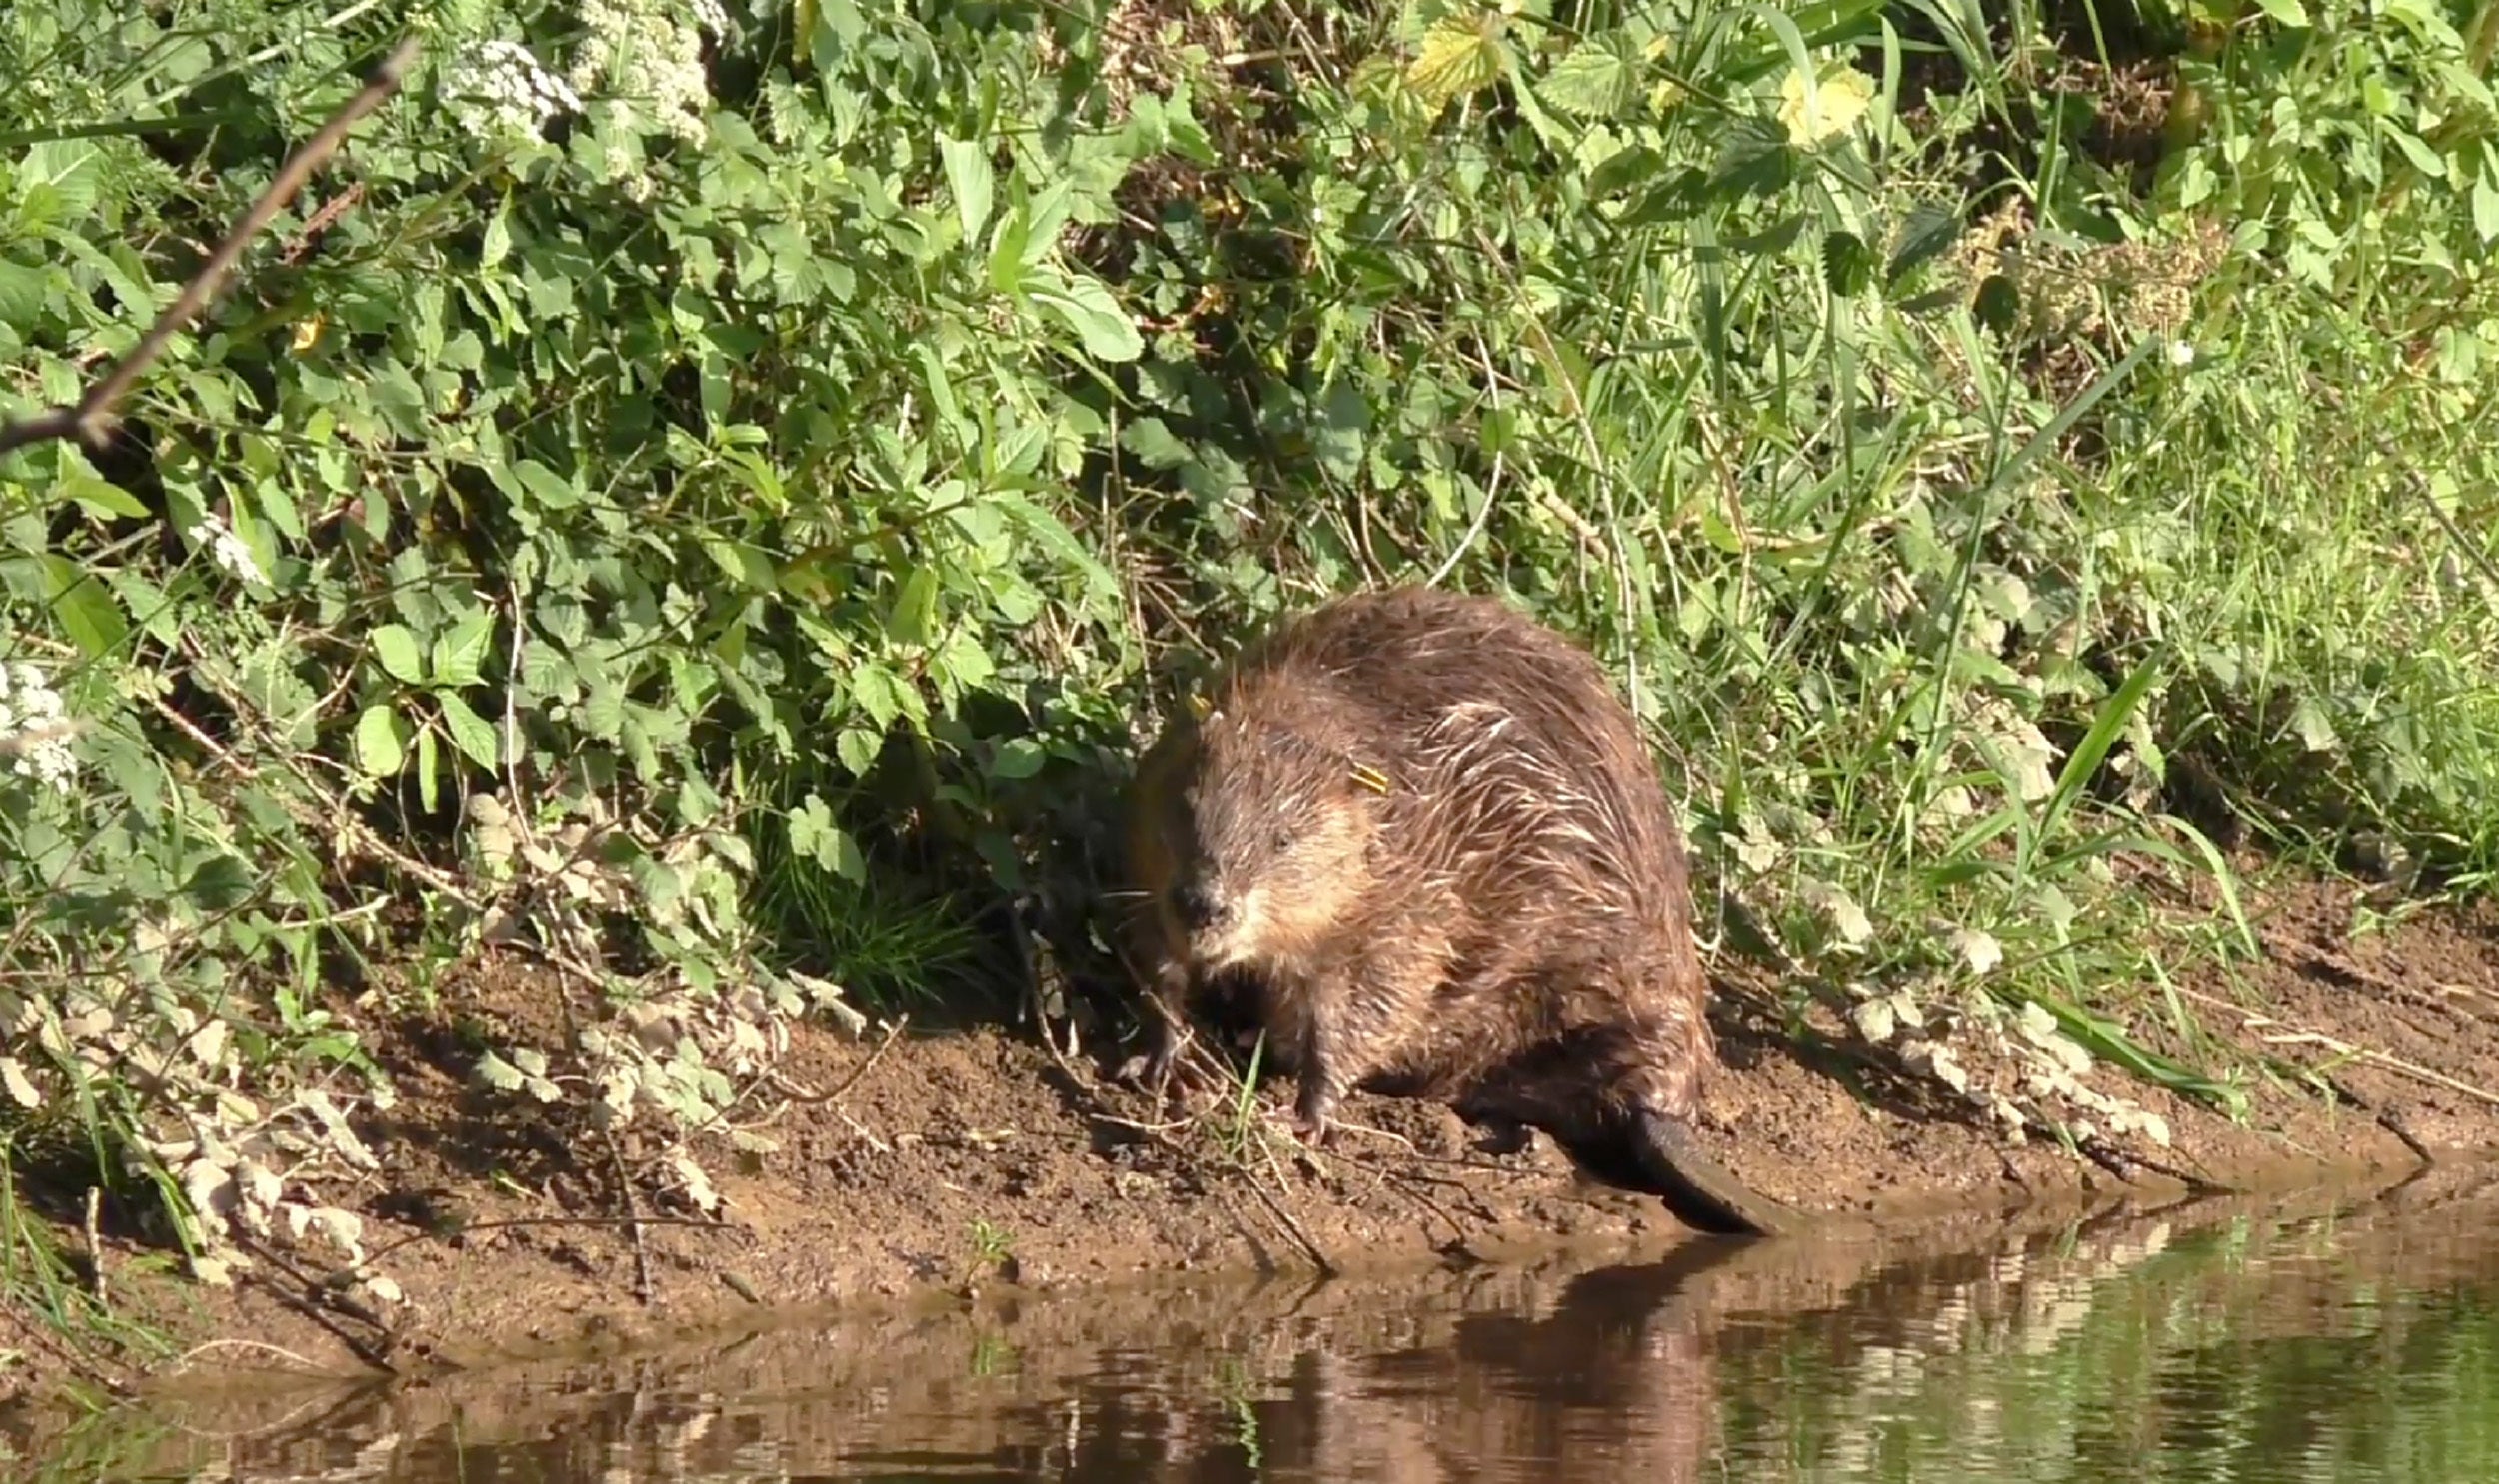 Wild beavers reduce flood risk and boost wildlife, study finds